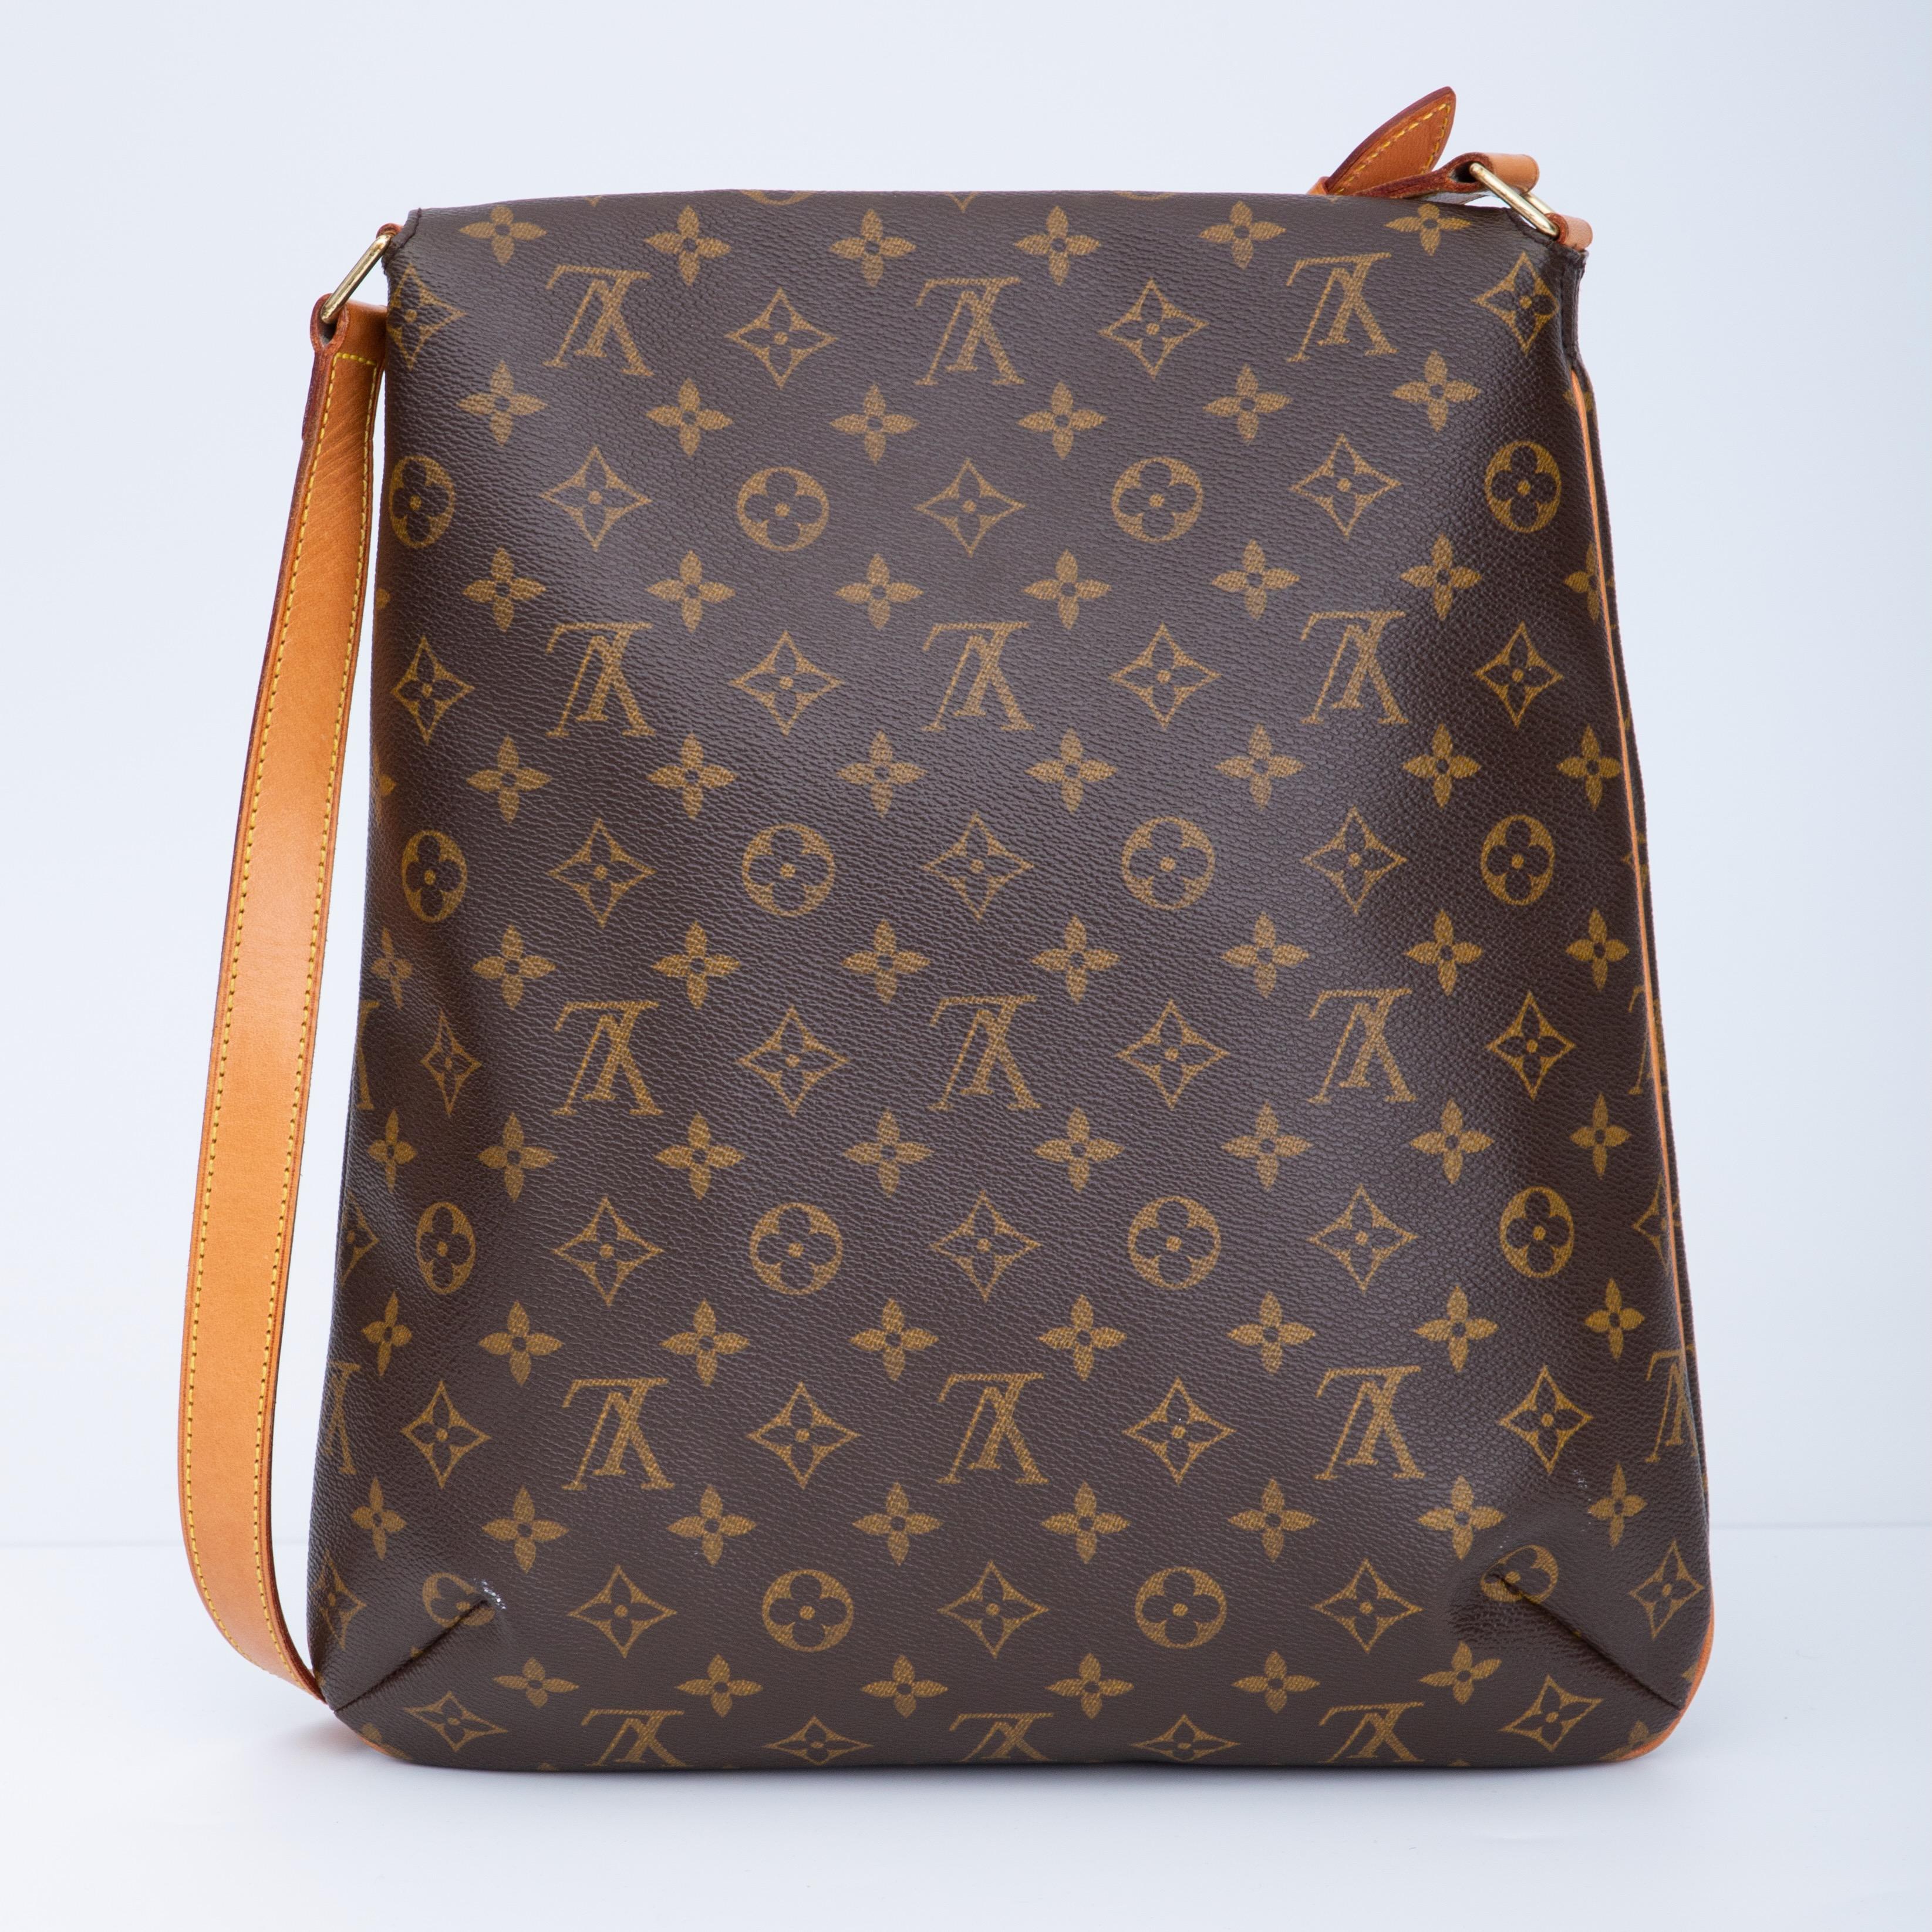 This bad is made of coated canvas with lv's monogram print with a long natural leather shoulder strap. The bag features brass hardware, tan vachetta leather details, a single adjustable flat shoulder strap, marigold alcantara interior lining, cross